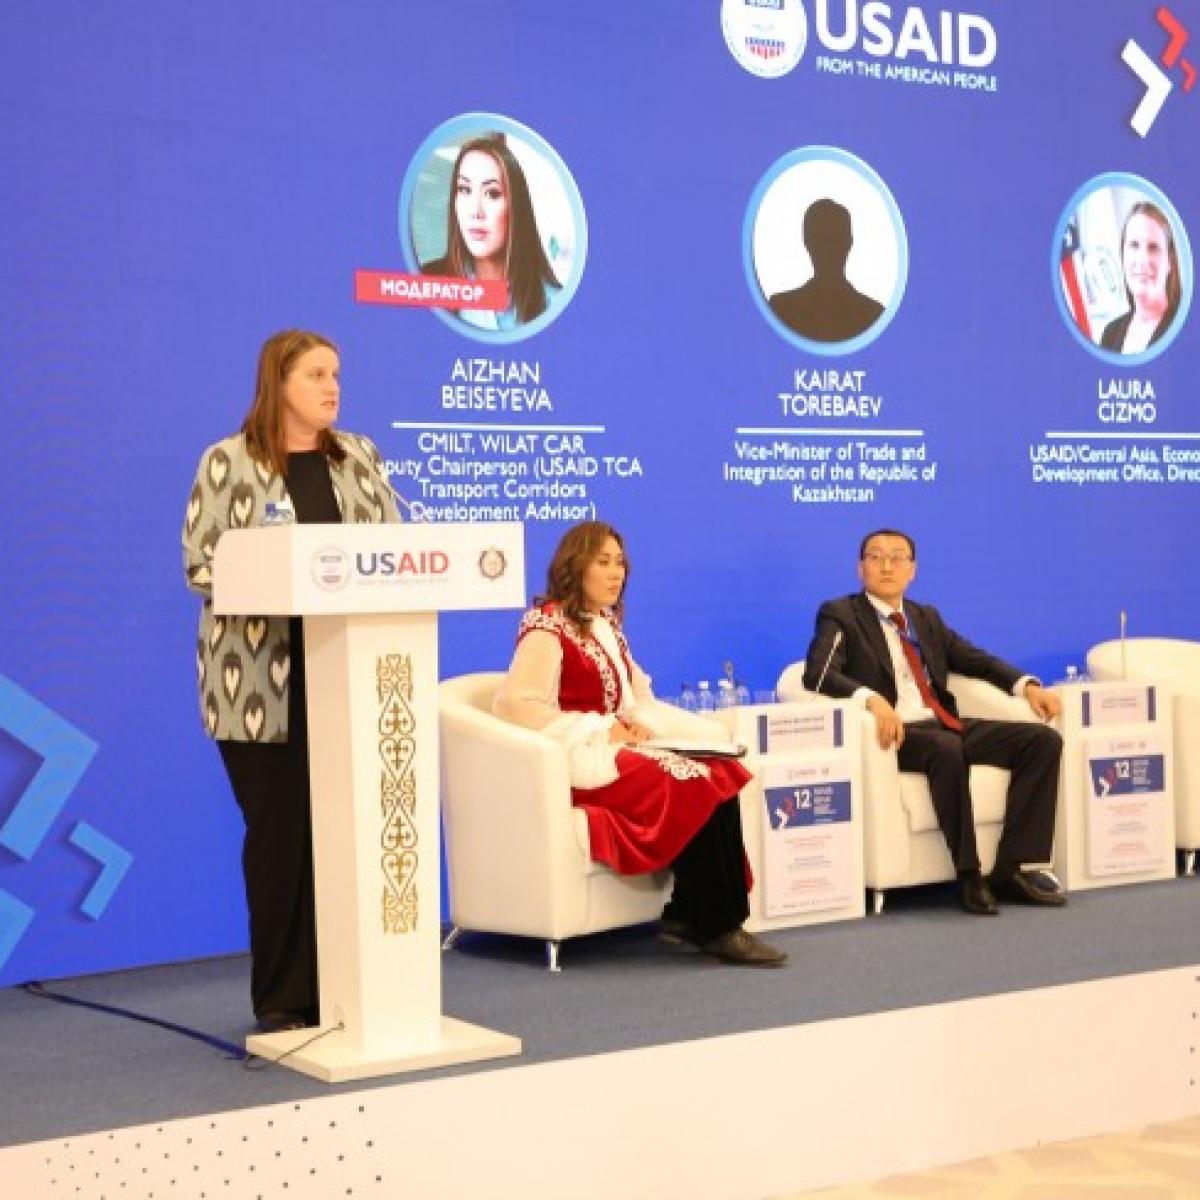 Laura Cizmo presenting opening remarks at the Central Asia Trade Forum with Aizhan Beiseyeva and Karat Torebaev sitting on the right.